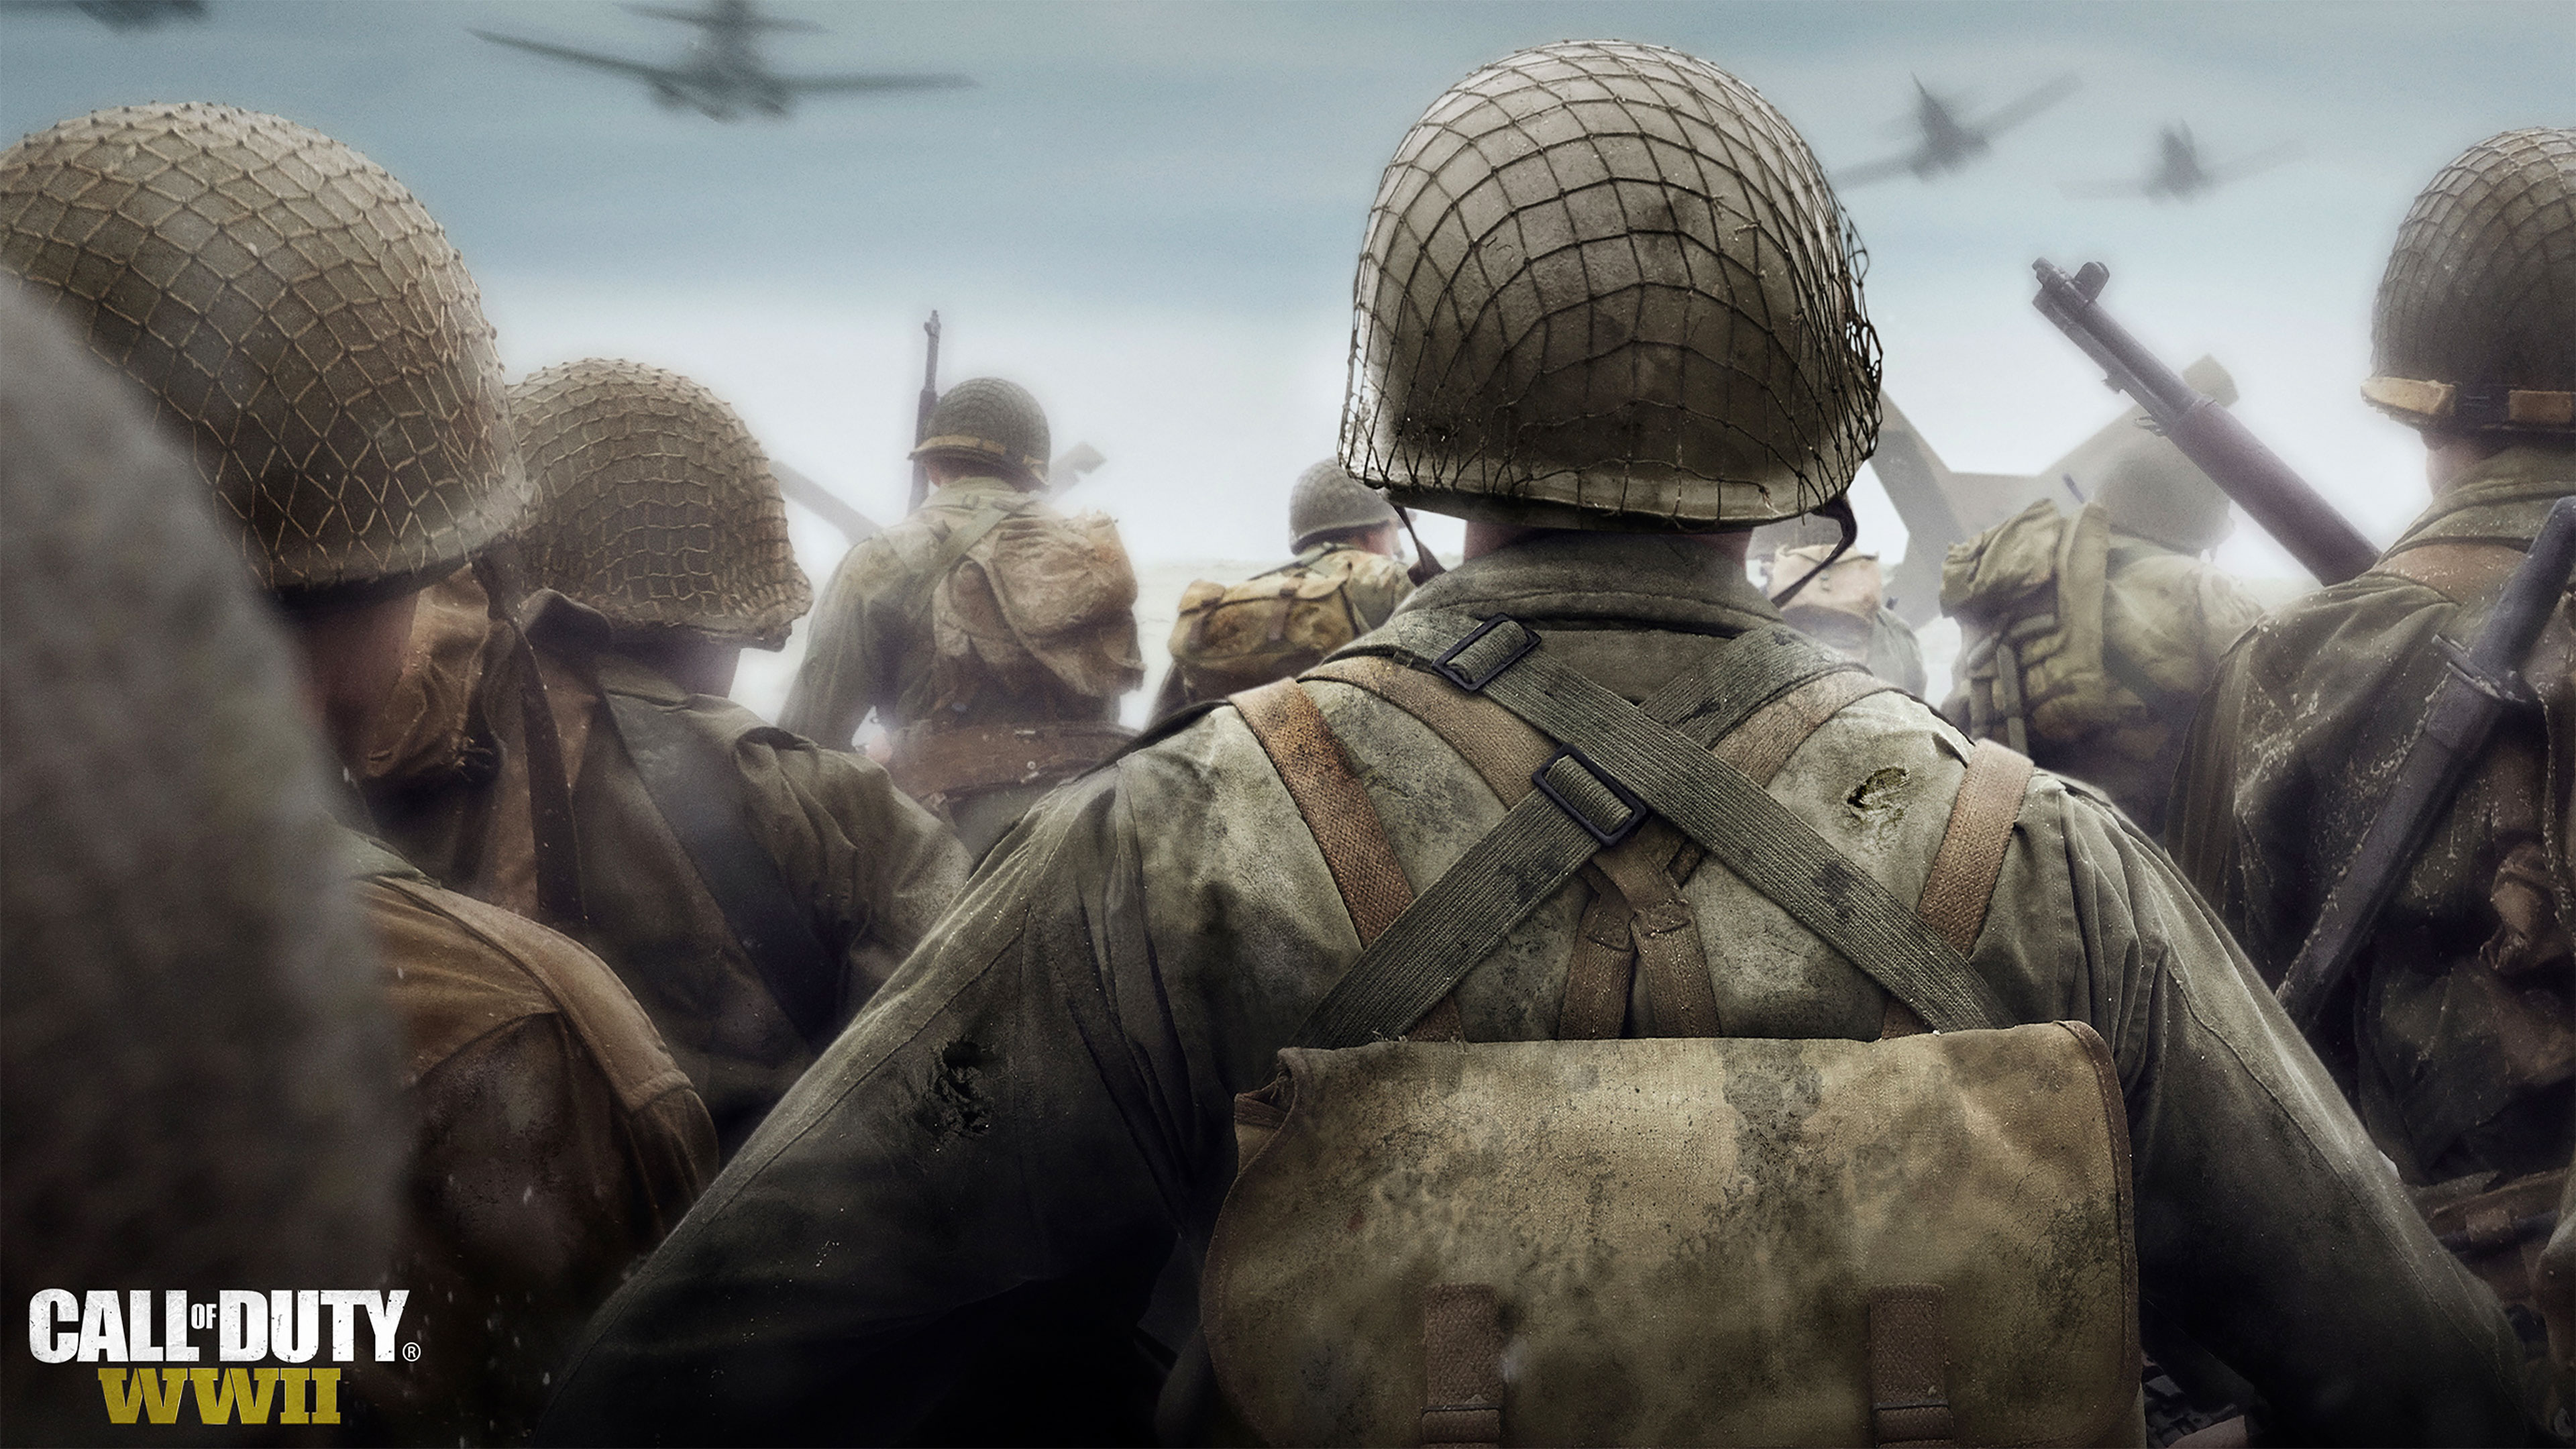 CALL OF DUTY WWII Wallpapers In Ultra HD 4K